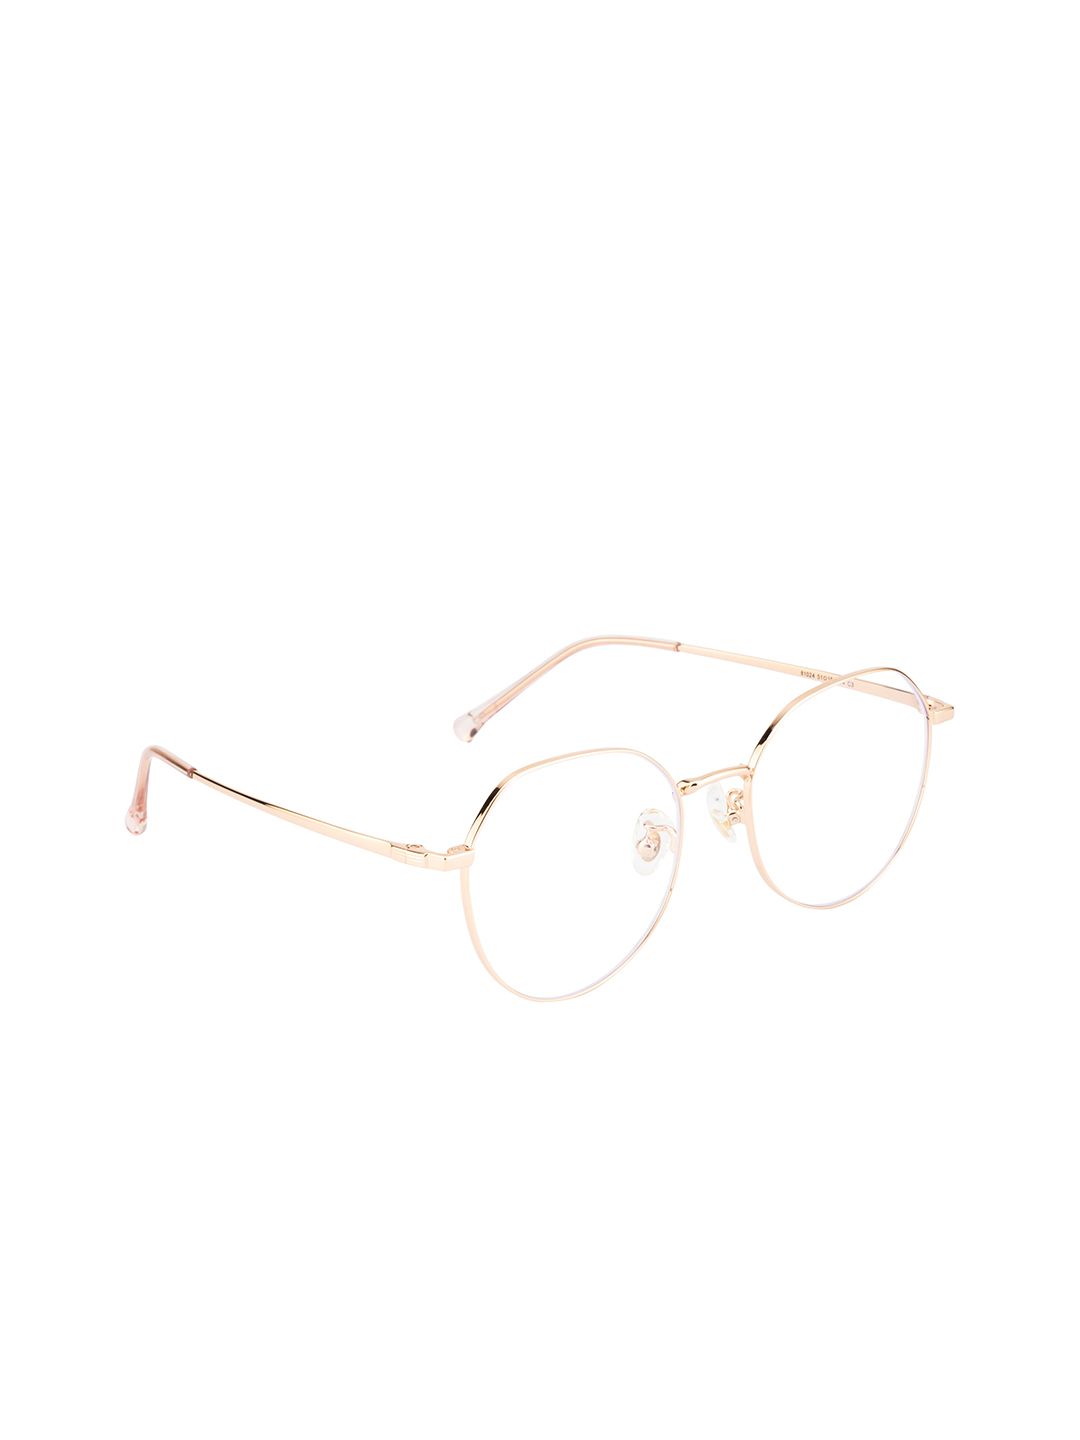 Ted Smith Unisex Rose Gold Full Rim Round Frames Price in India